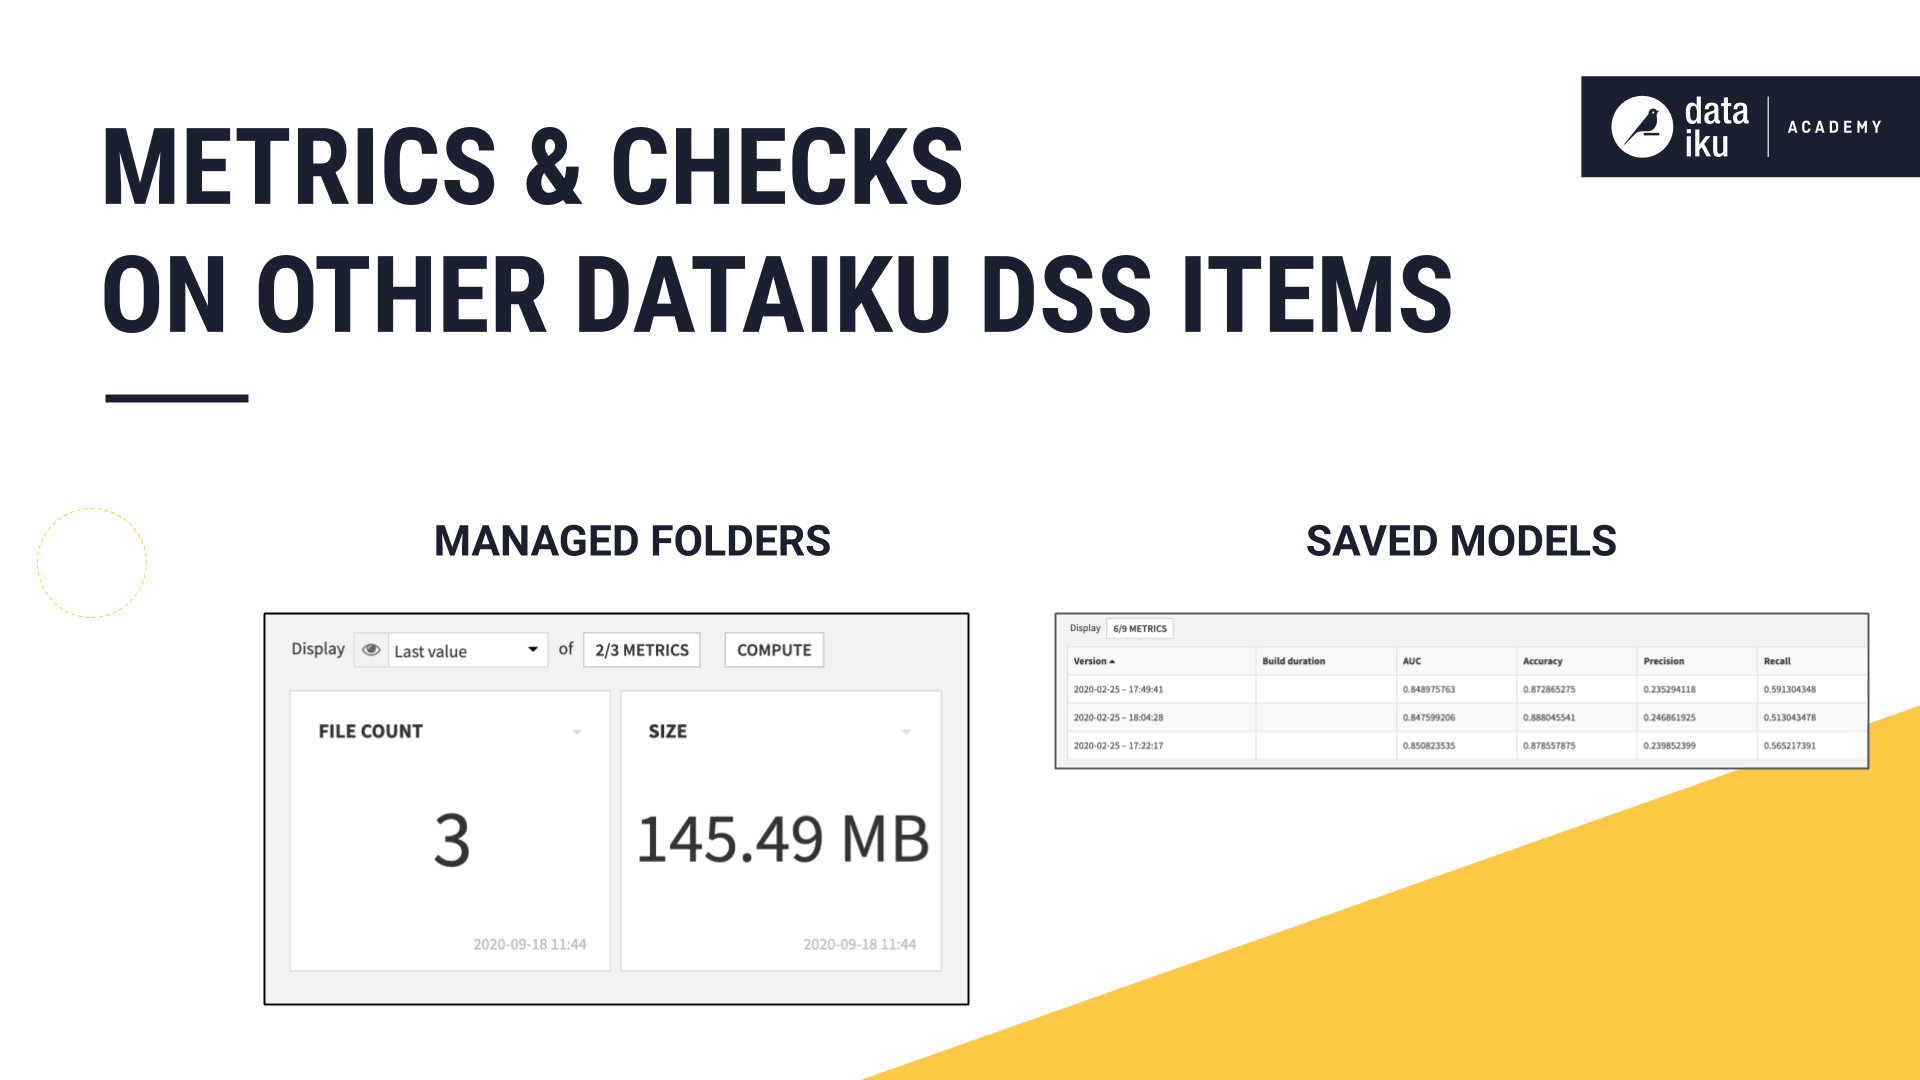 Slide depicting that metrics and checks can be tracked on other Dataiku items like managed folders and saved models.